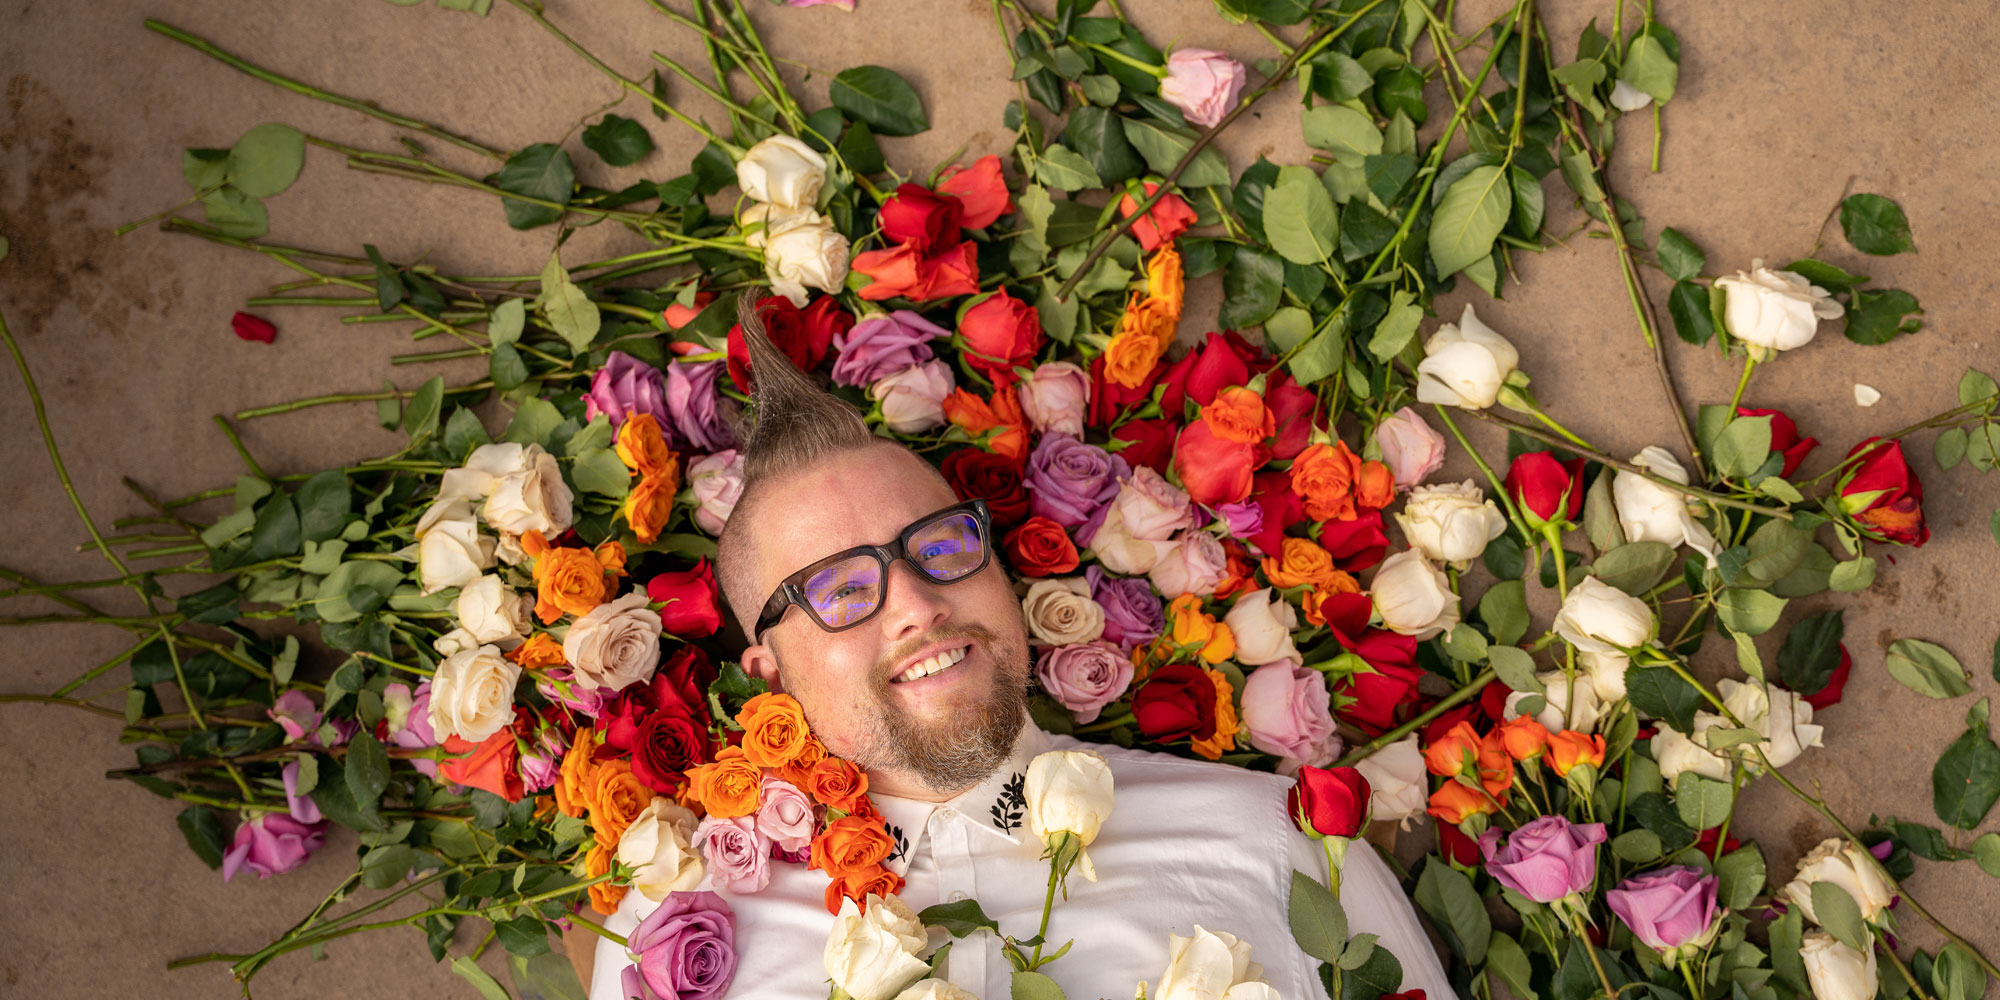 Man with mohawk and glasses wears a white button-down shirt and lays in a pile of white, pink, red and orange roses.